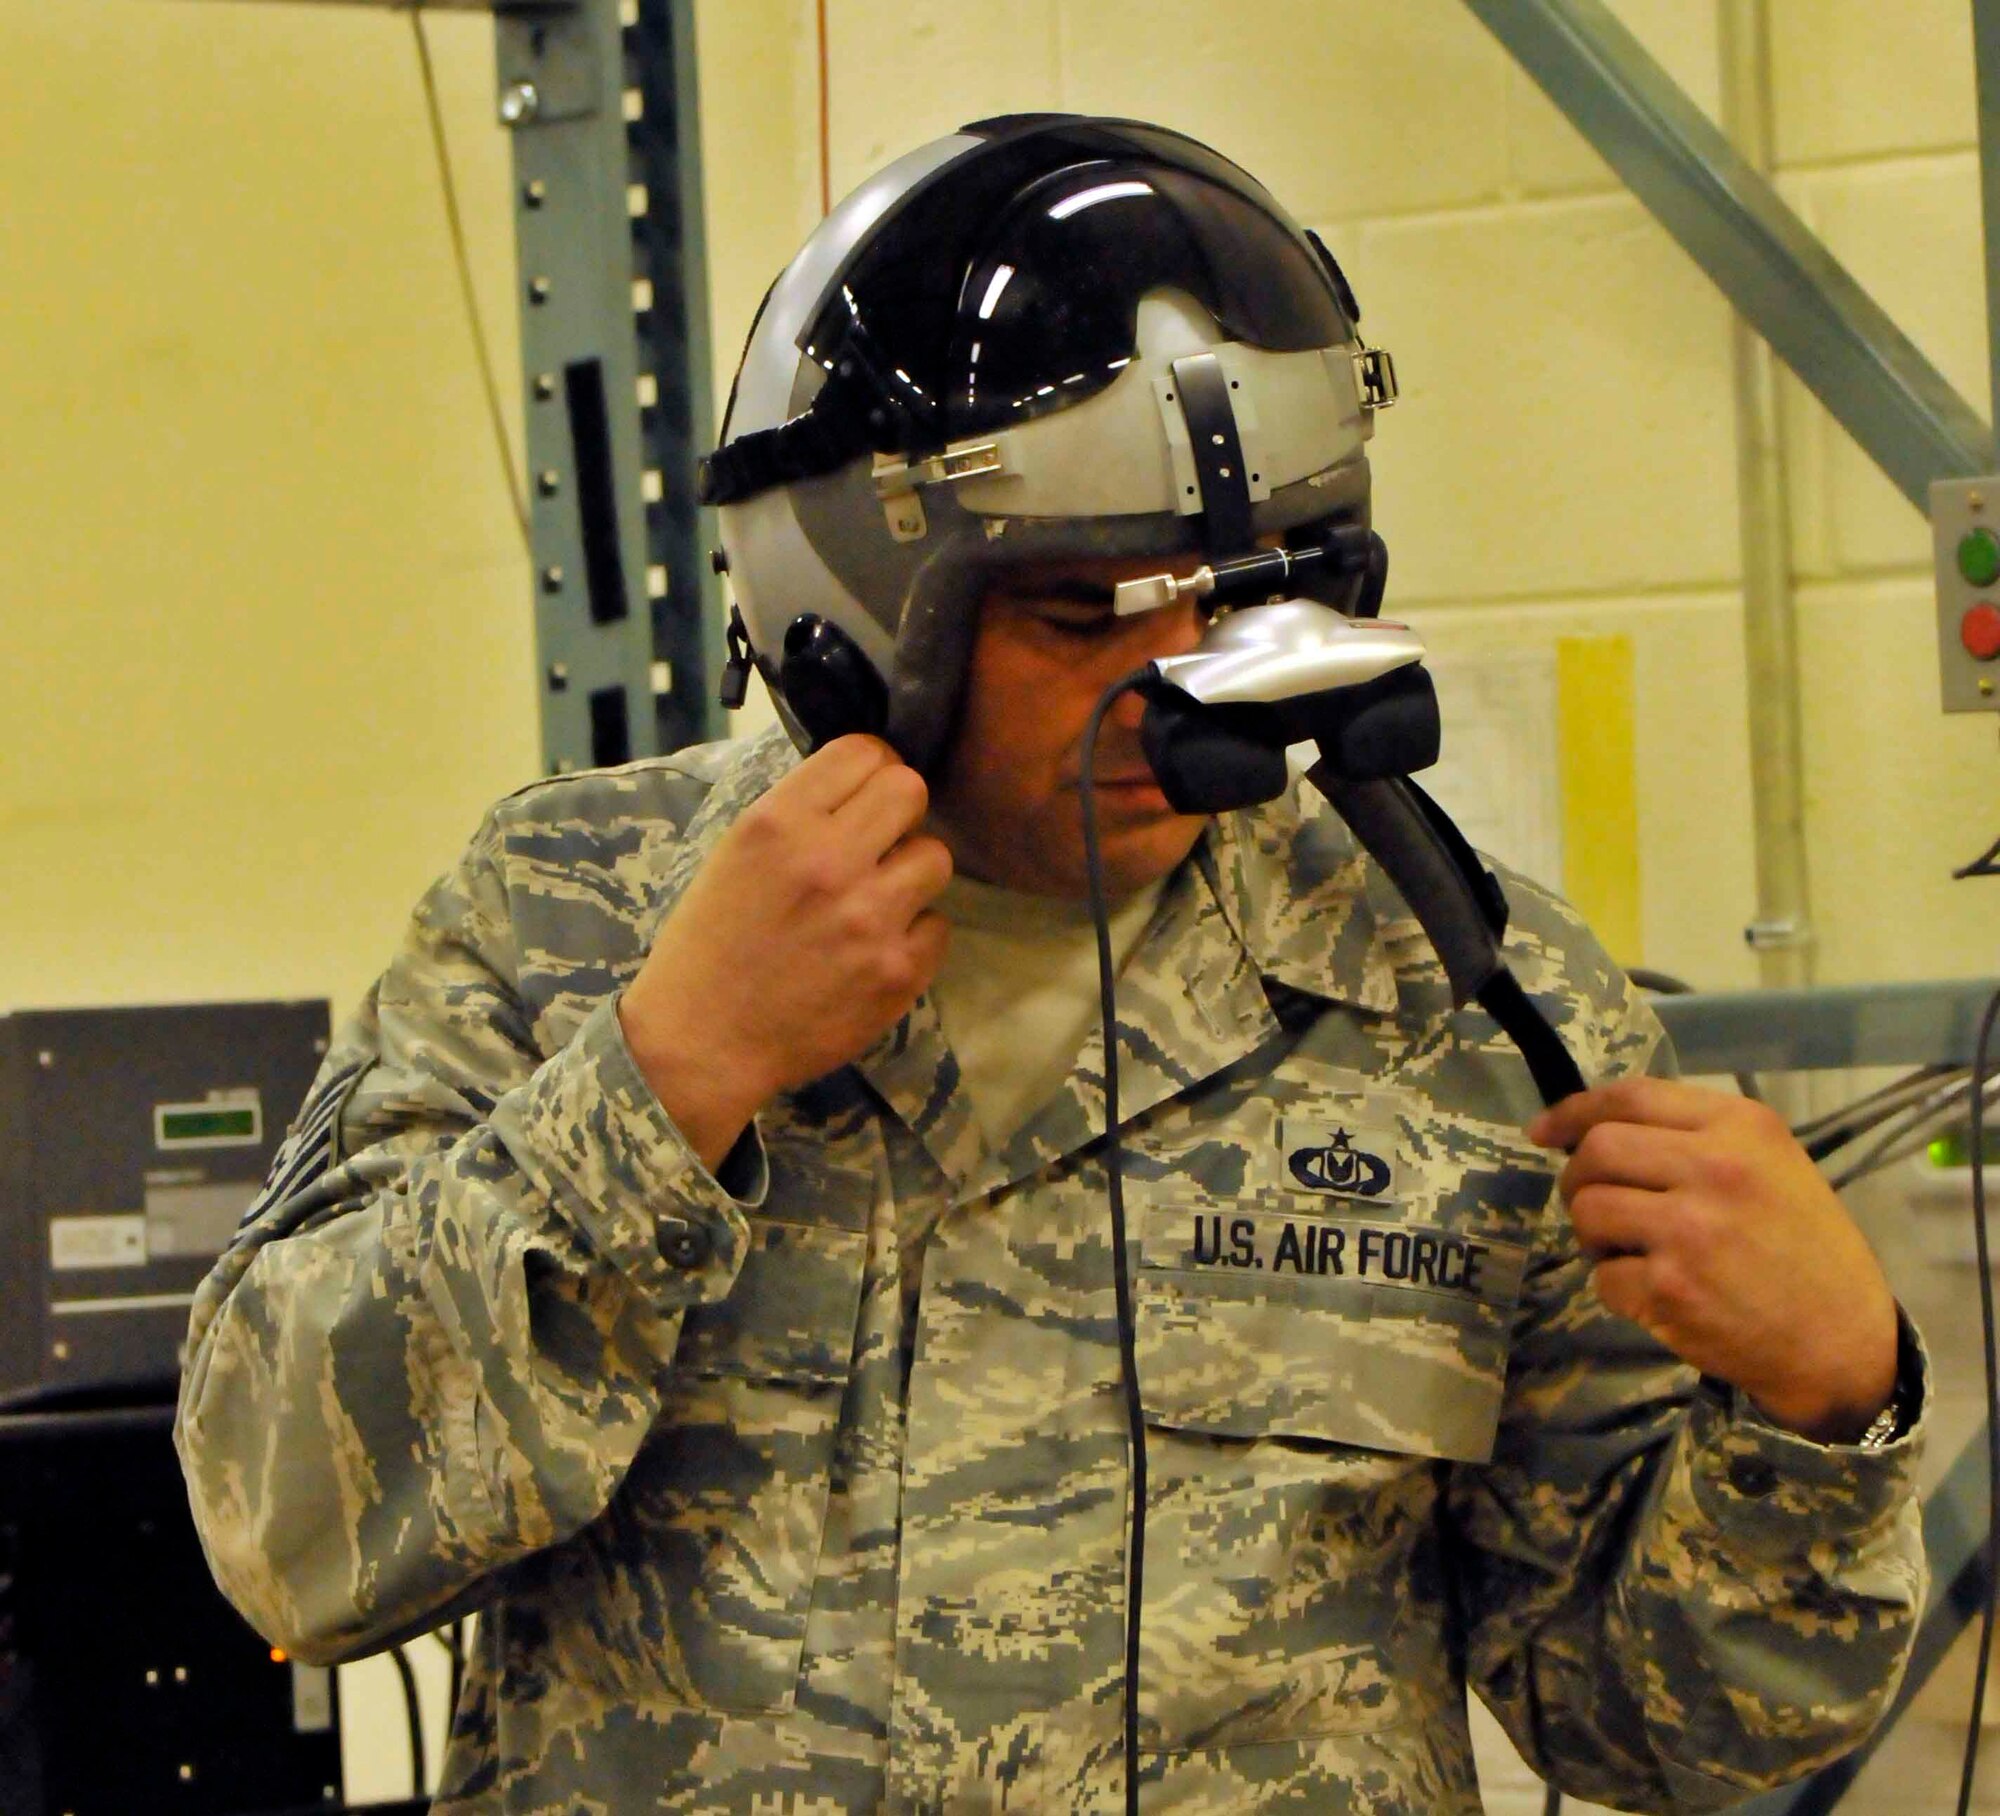 PATRICK AIR FORCE BASE, Fla. - Tech. Sgt. Xavier Coronel, aircrew flight equipment specialist, 920th Operation Support Squadron, prepares to test out the parachute simulator. Pararescueman use the simulator to prepare themselves for when they deploy their parachutes. (U.S. Air Force Photo/Capt. Ryan Liss)